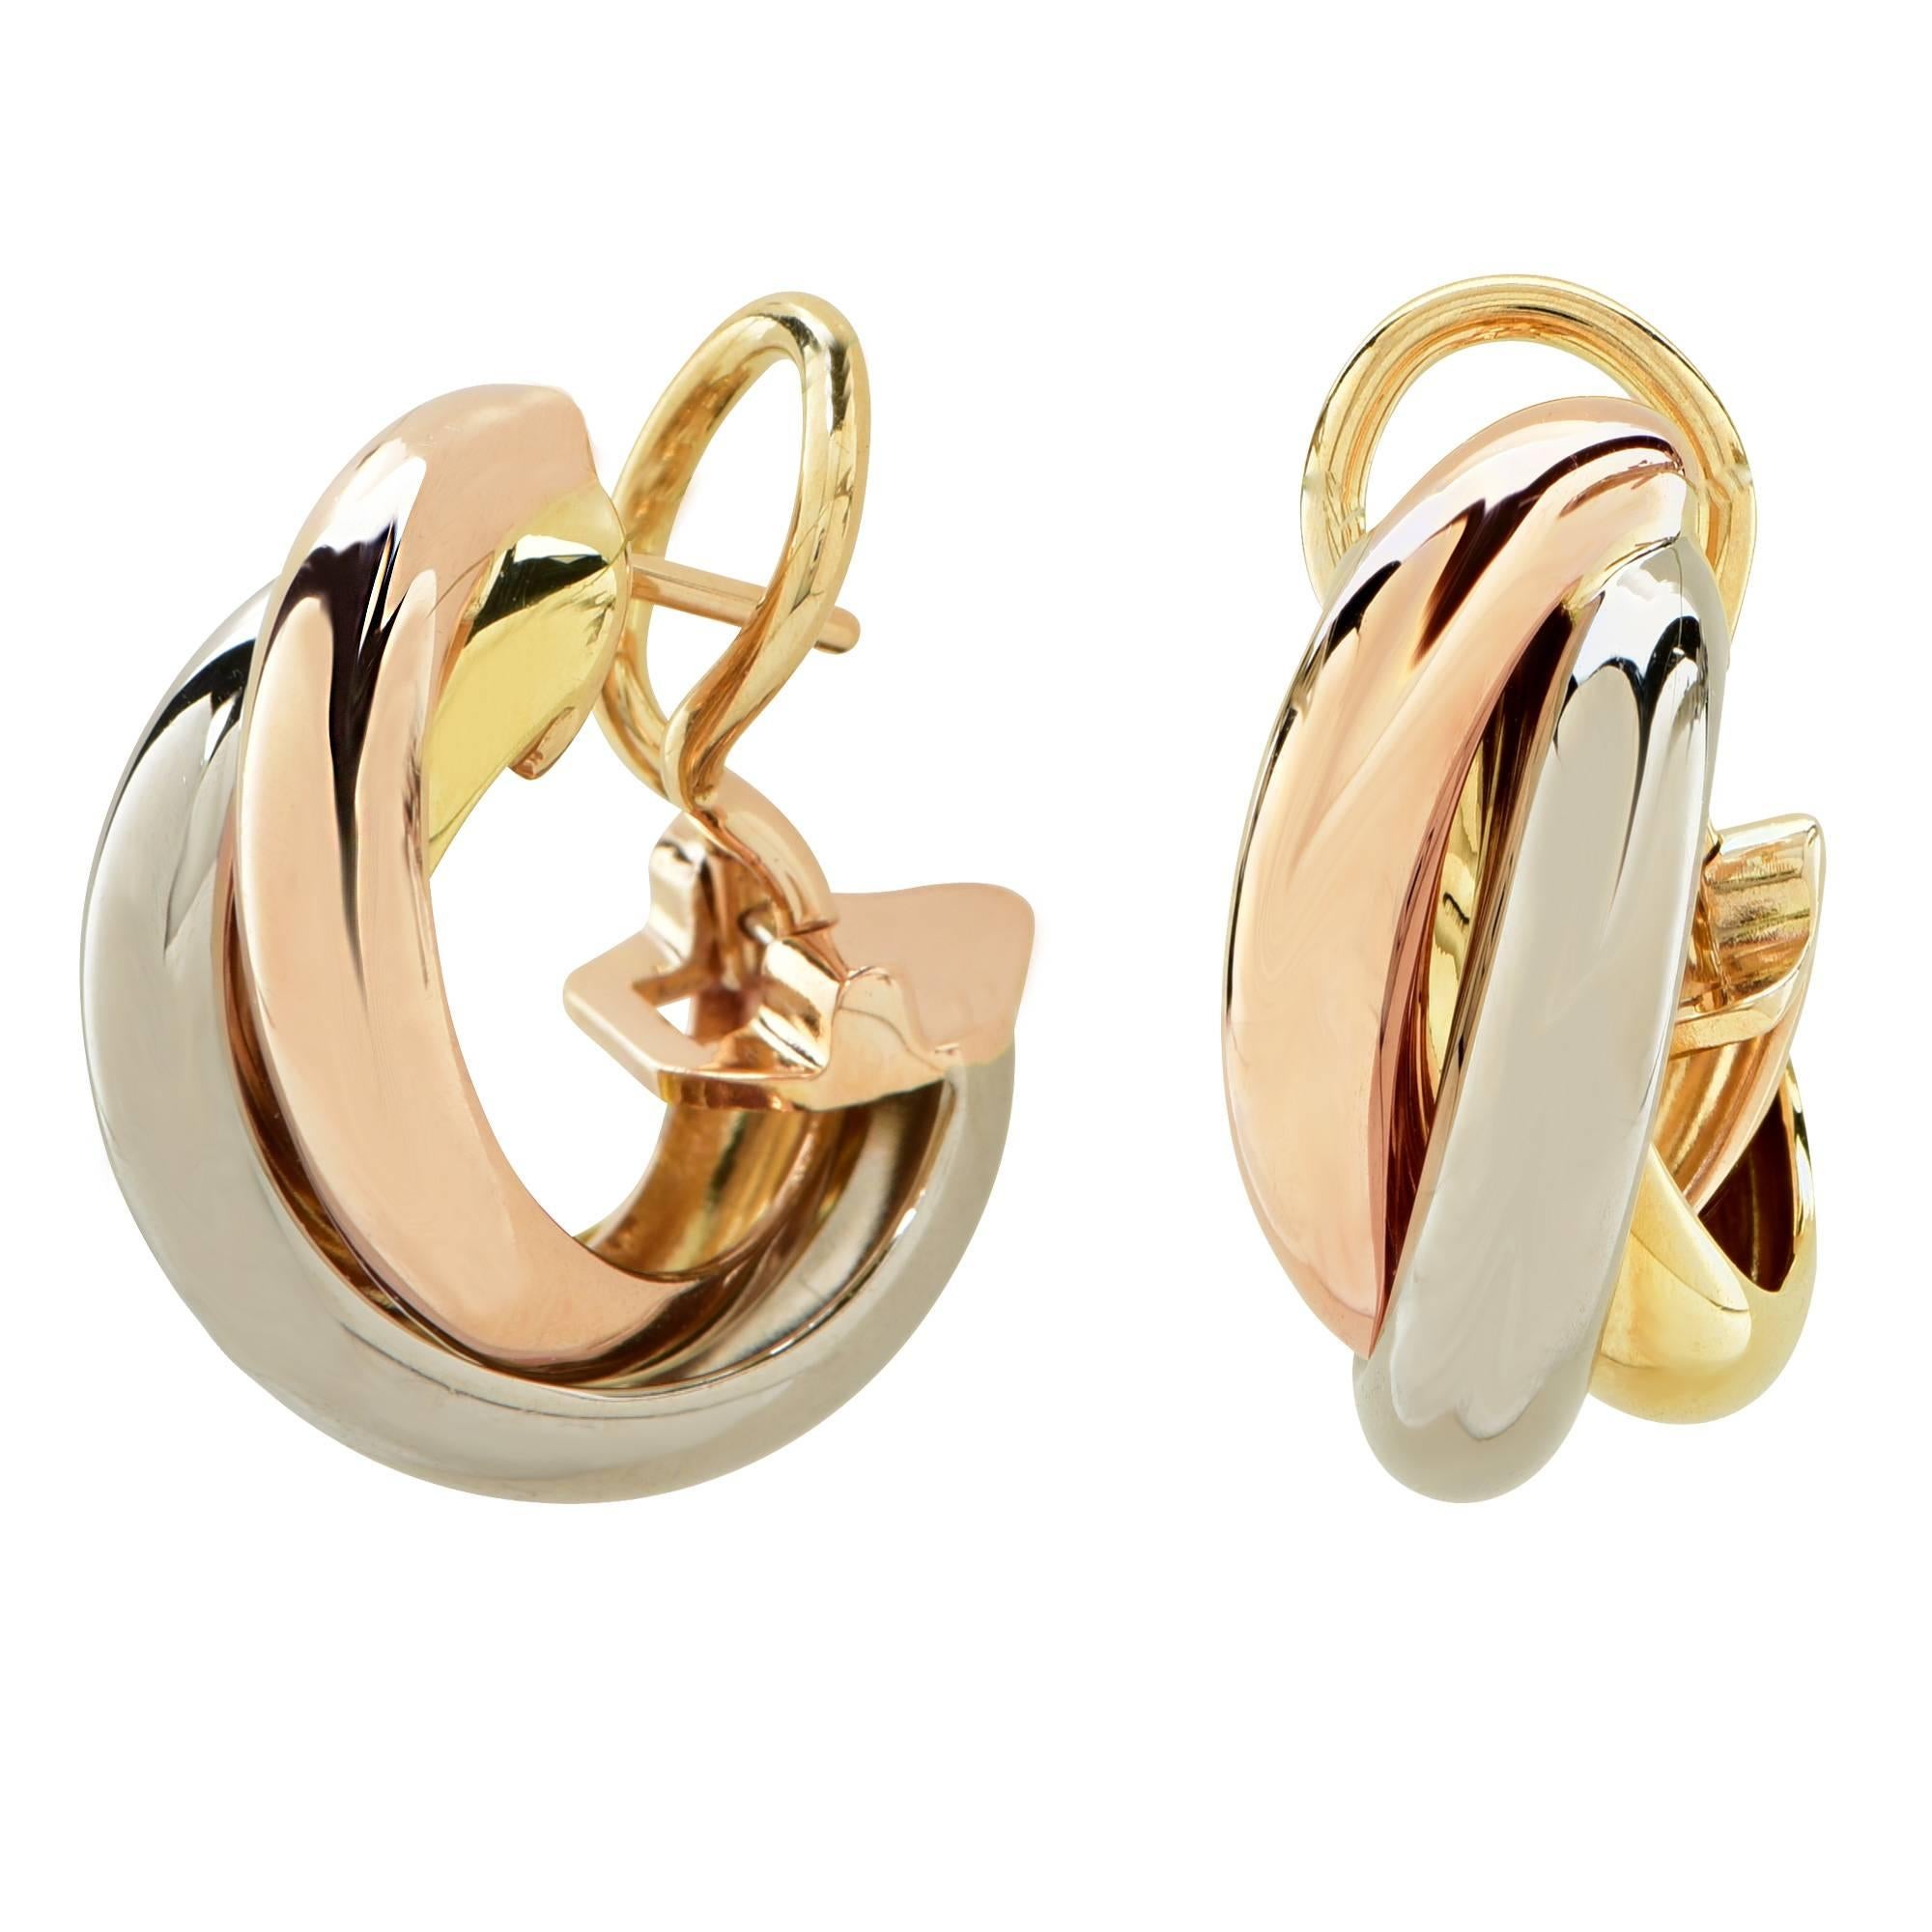 Cartier Trinity hoop earrings, featuring three bands, three colors, pink, yellow and white gold. Cartier created this design in 1924 and the style quickly earned iconic status. The tri-color gold represents, pink for love, yellow for fidelity and